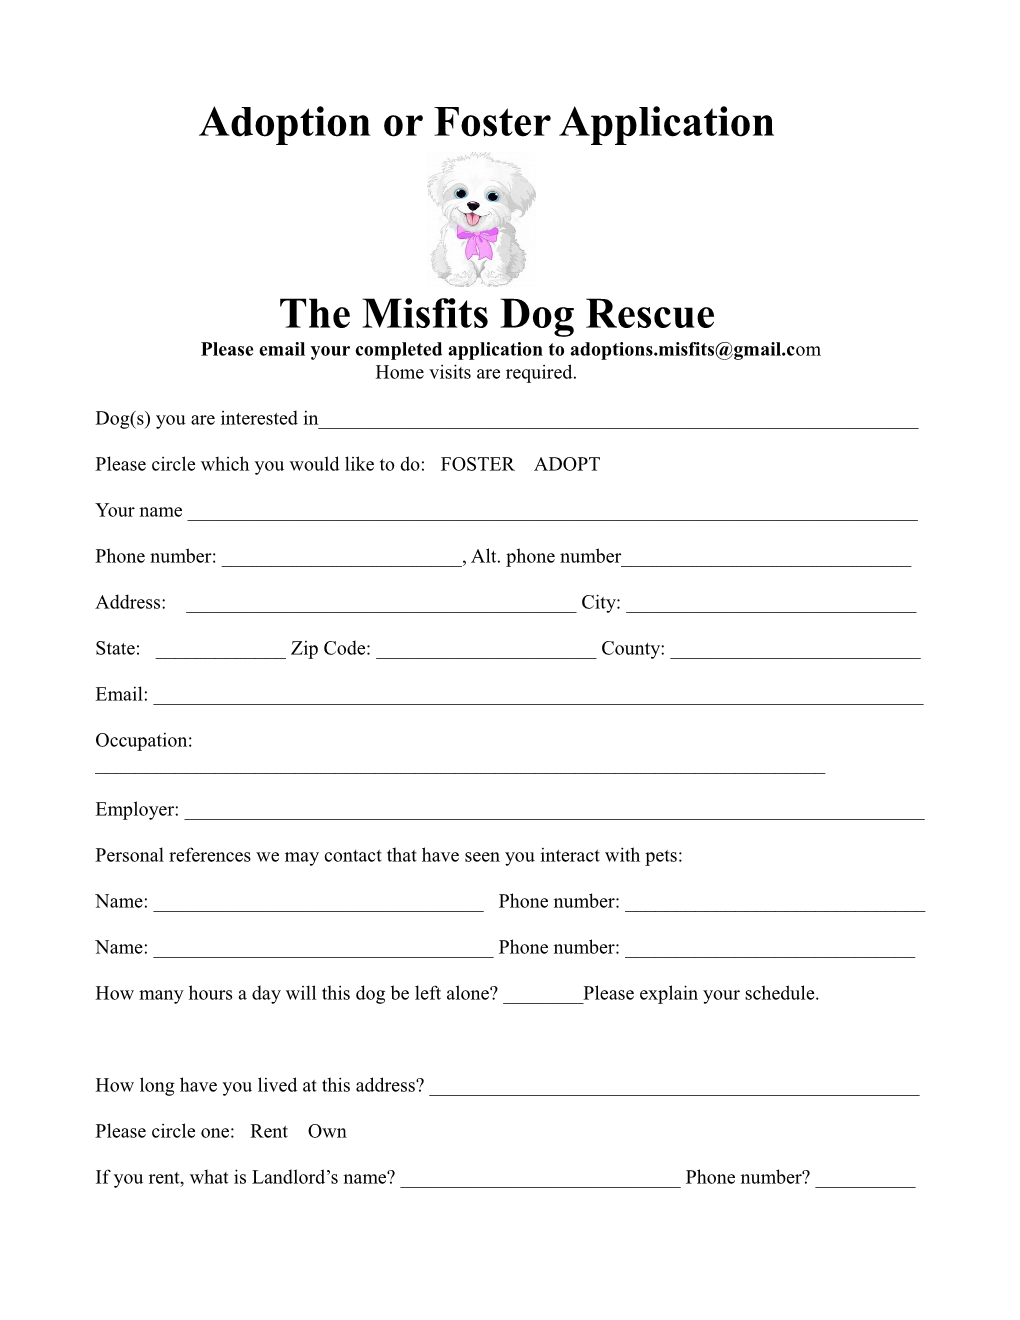 The Misfits Dog Rescue